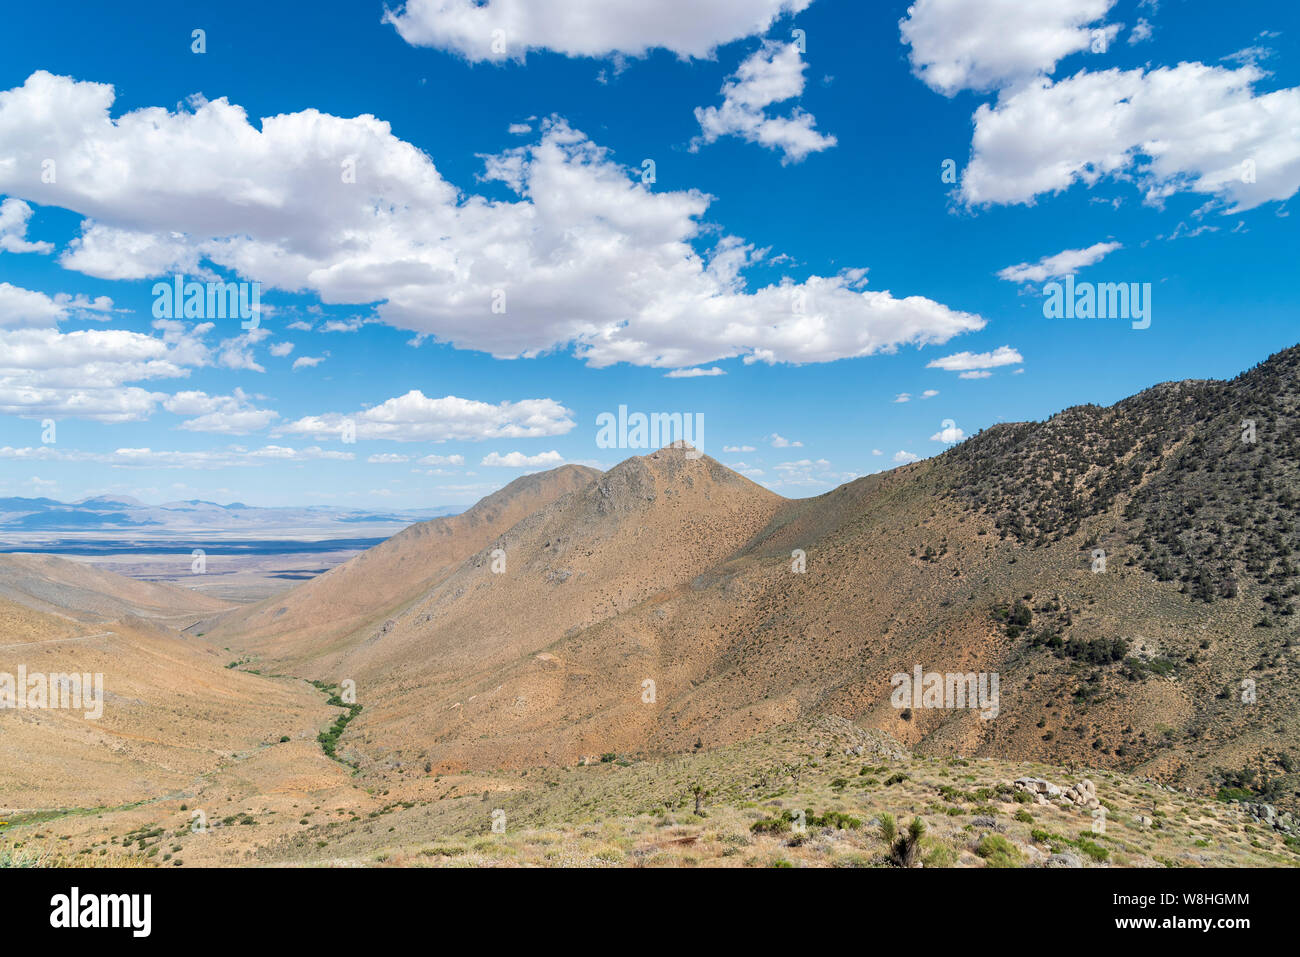 Looking out over desert canyon,  and mountains with valley below under blue sky with white clouds. Stock Photo